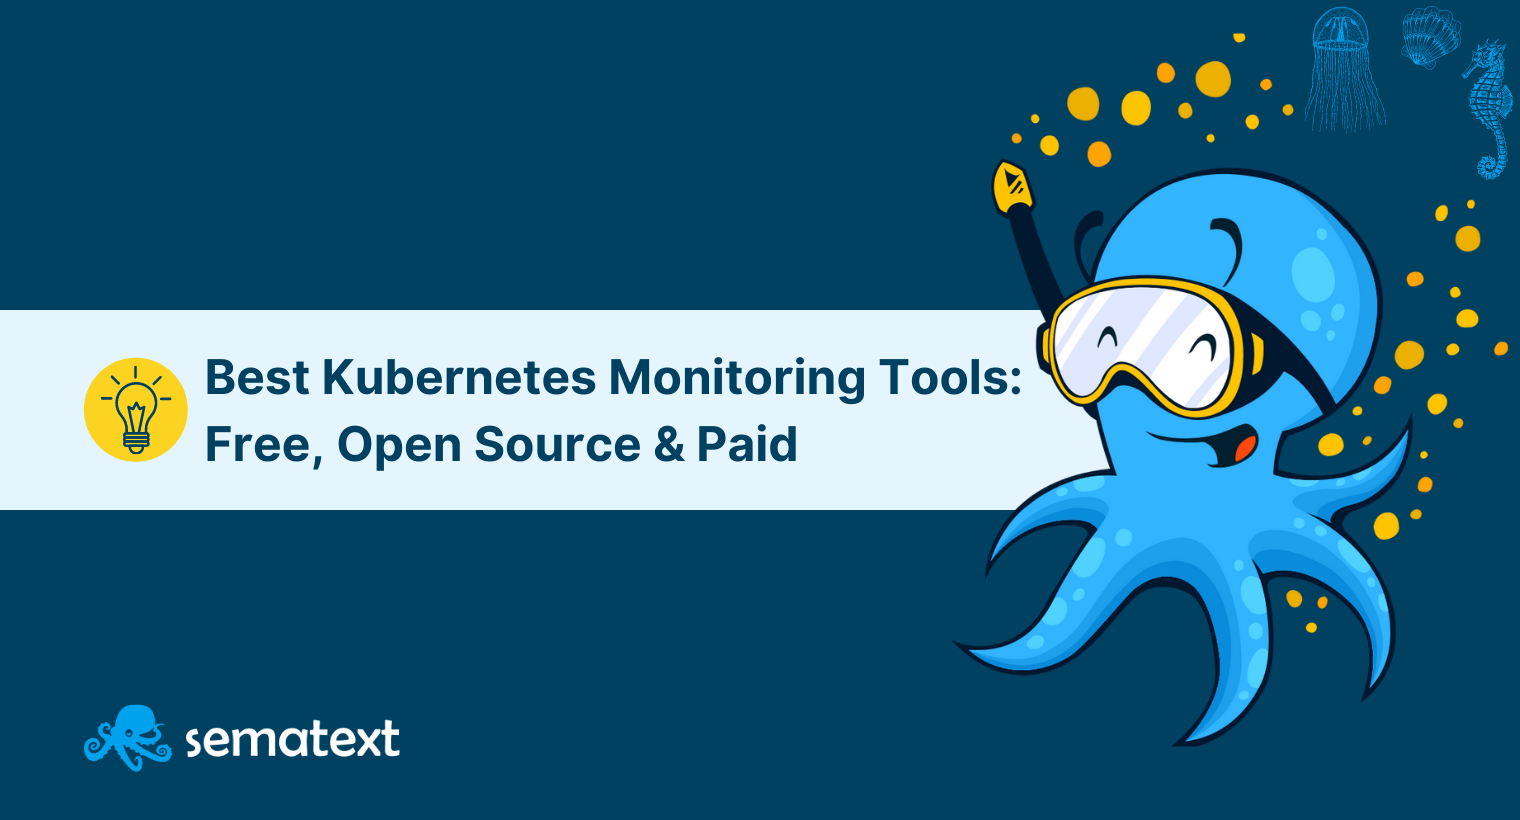 13 Best Kubernetes Monitoring Tools: Free, Open Source & Paid [2023 Comparison]